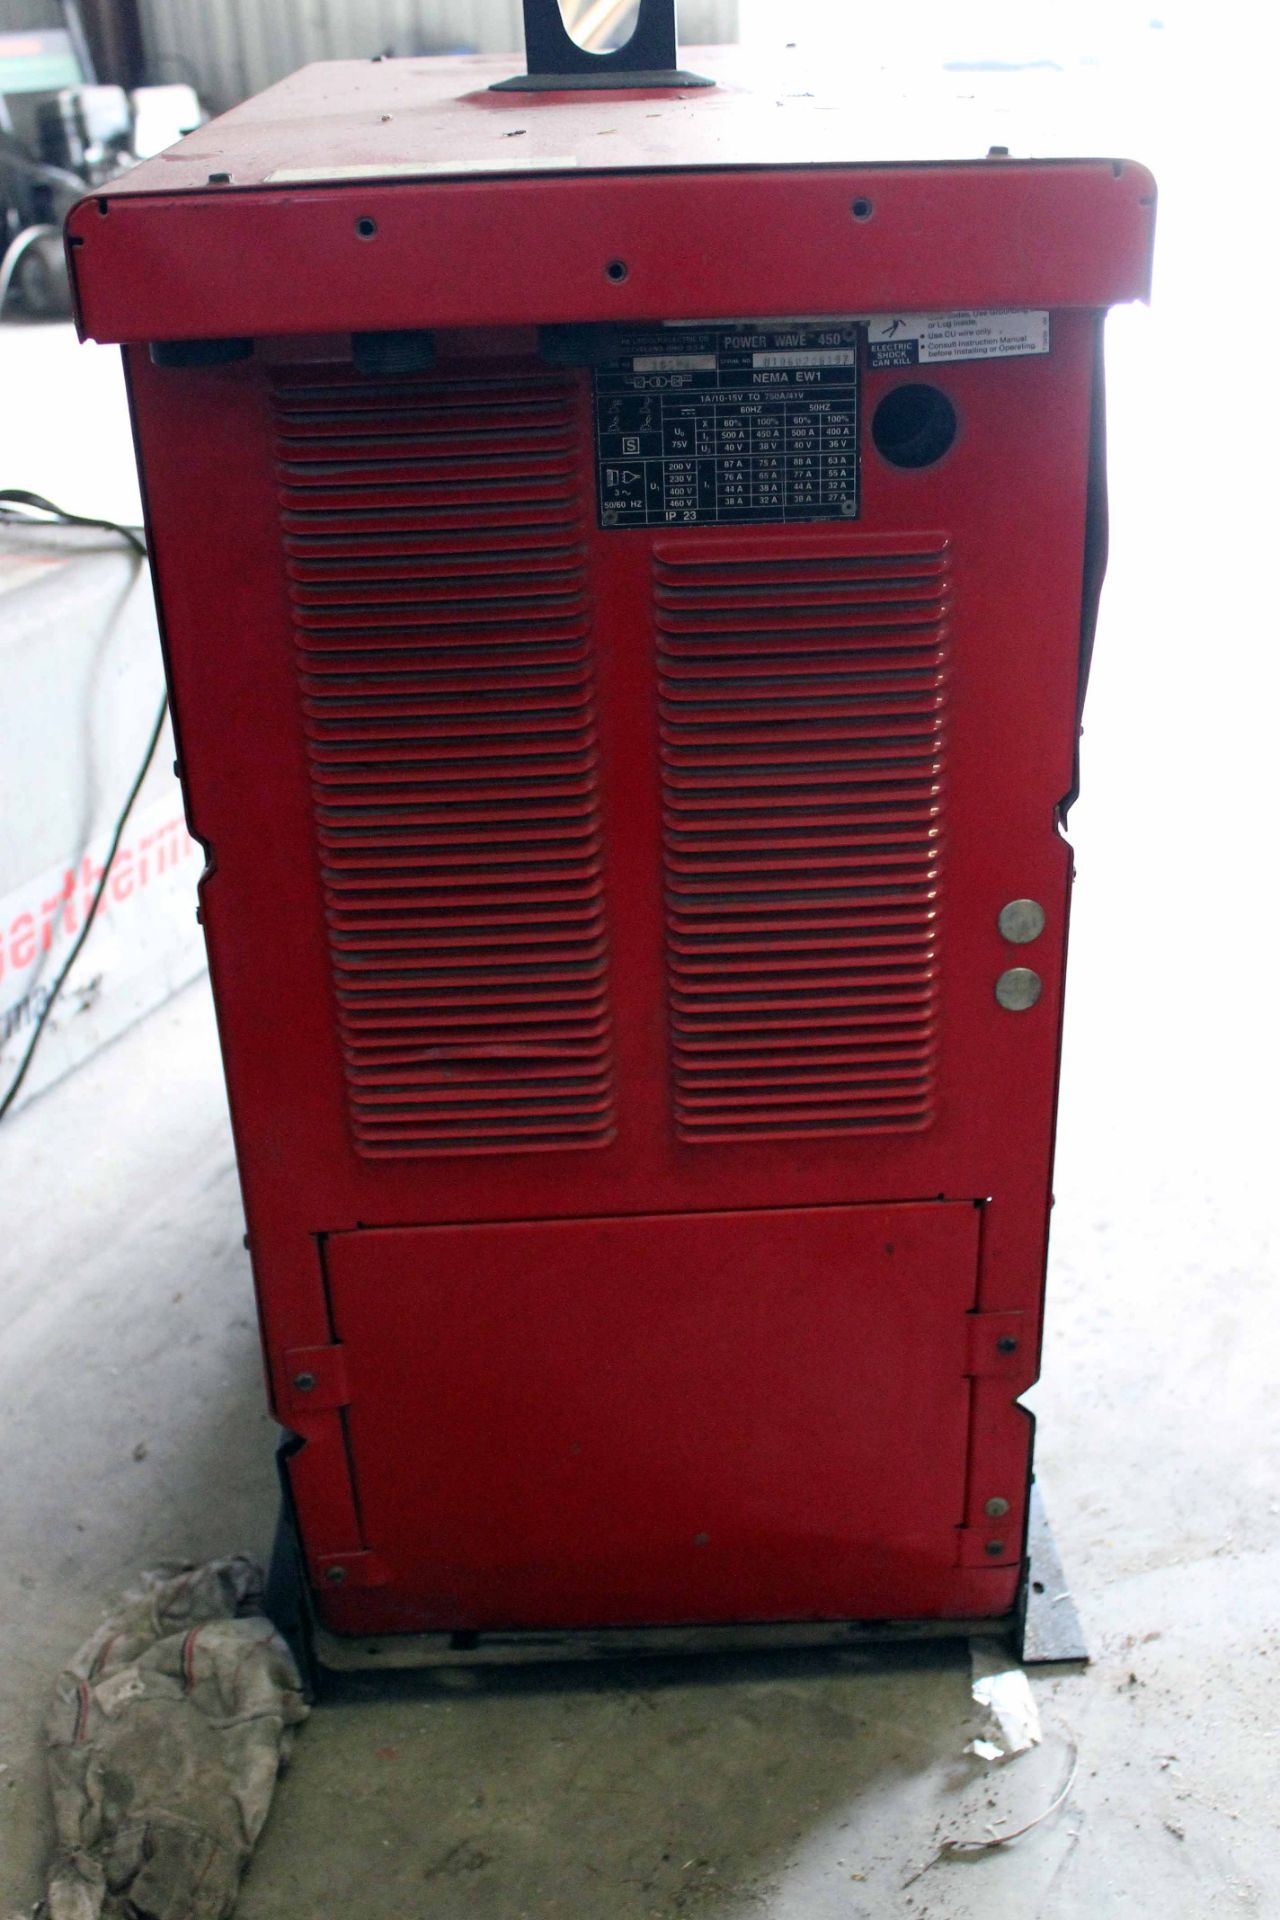 WELDING POWER SOURCE, LINCOLN POWERWAVE MDL. 450, 450 amp cap., S/N U1980417703 (Location E- - Image 4 of 4